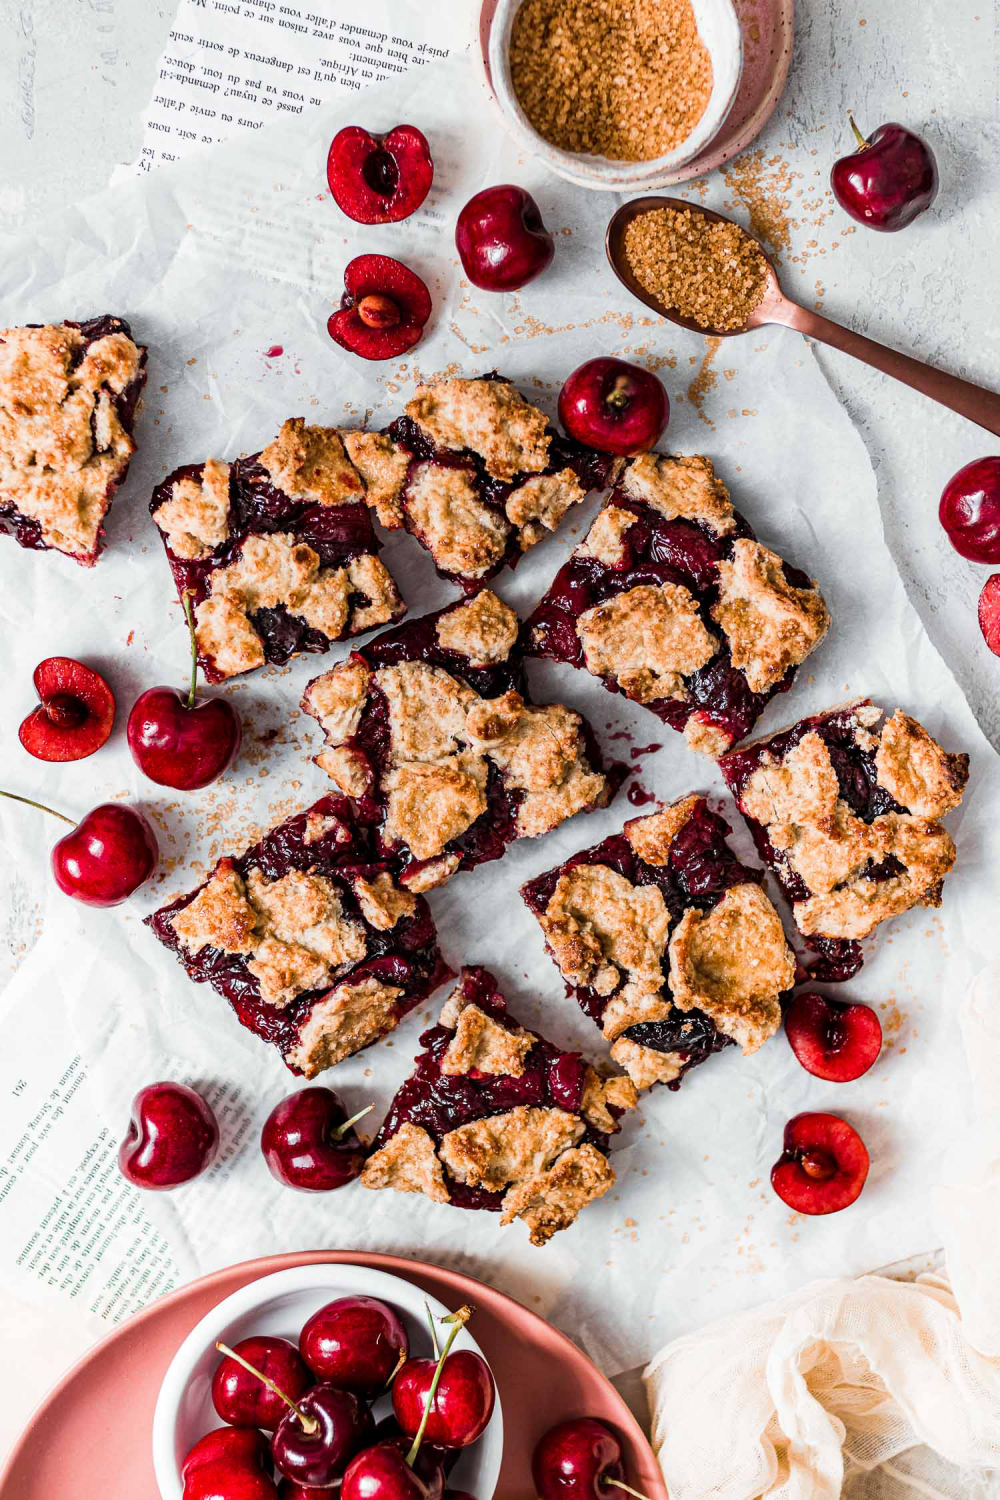 Cherry Bars scattered on a parchment paper.